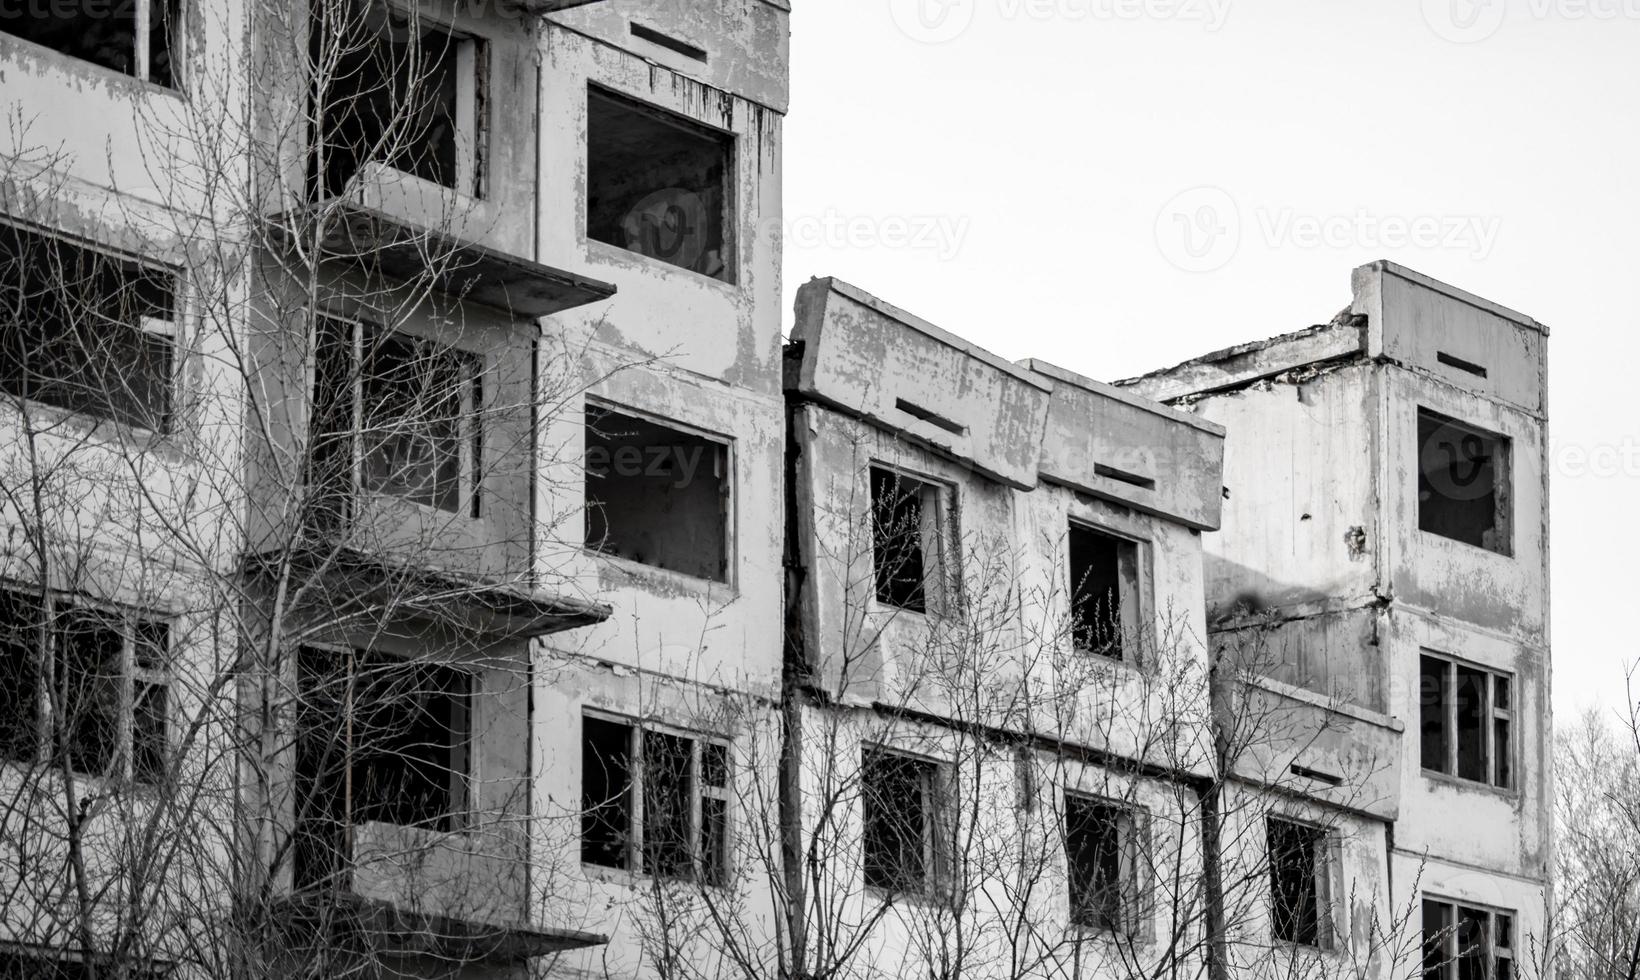 Dilapidated residential building with empty windows, collapsed roof, collapsed roof. Black and white photo